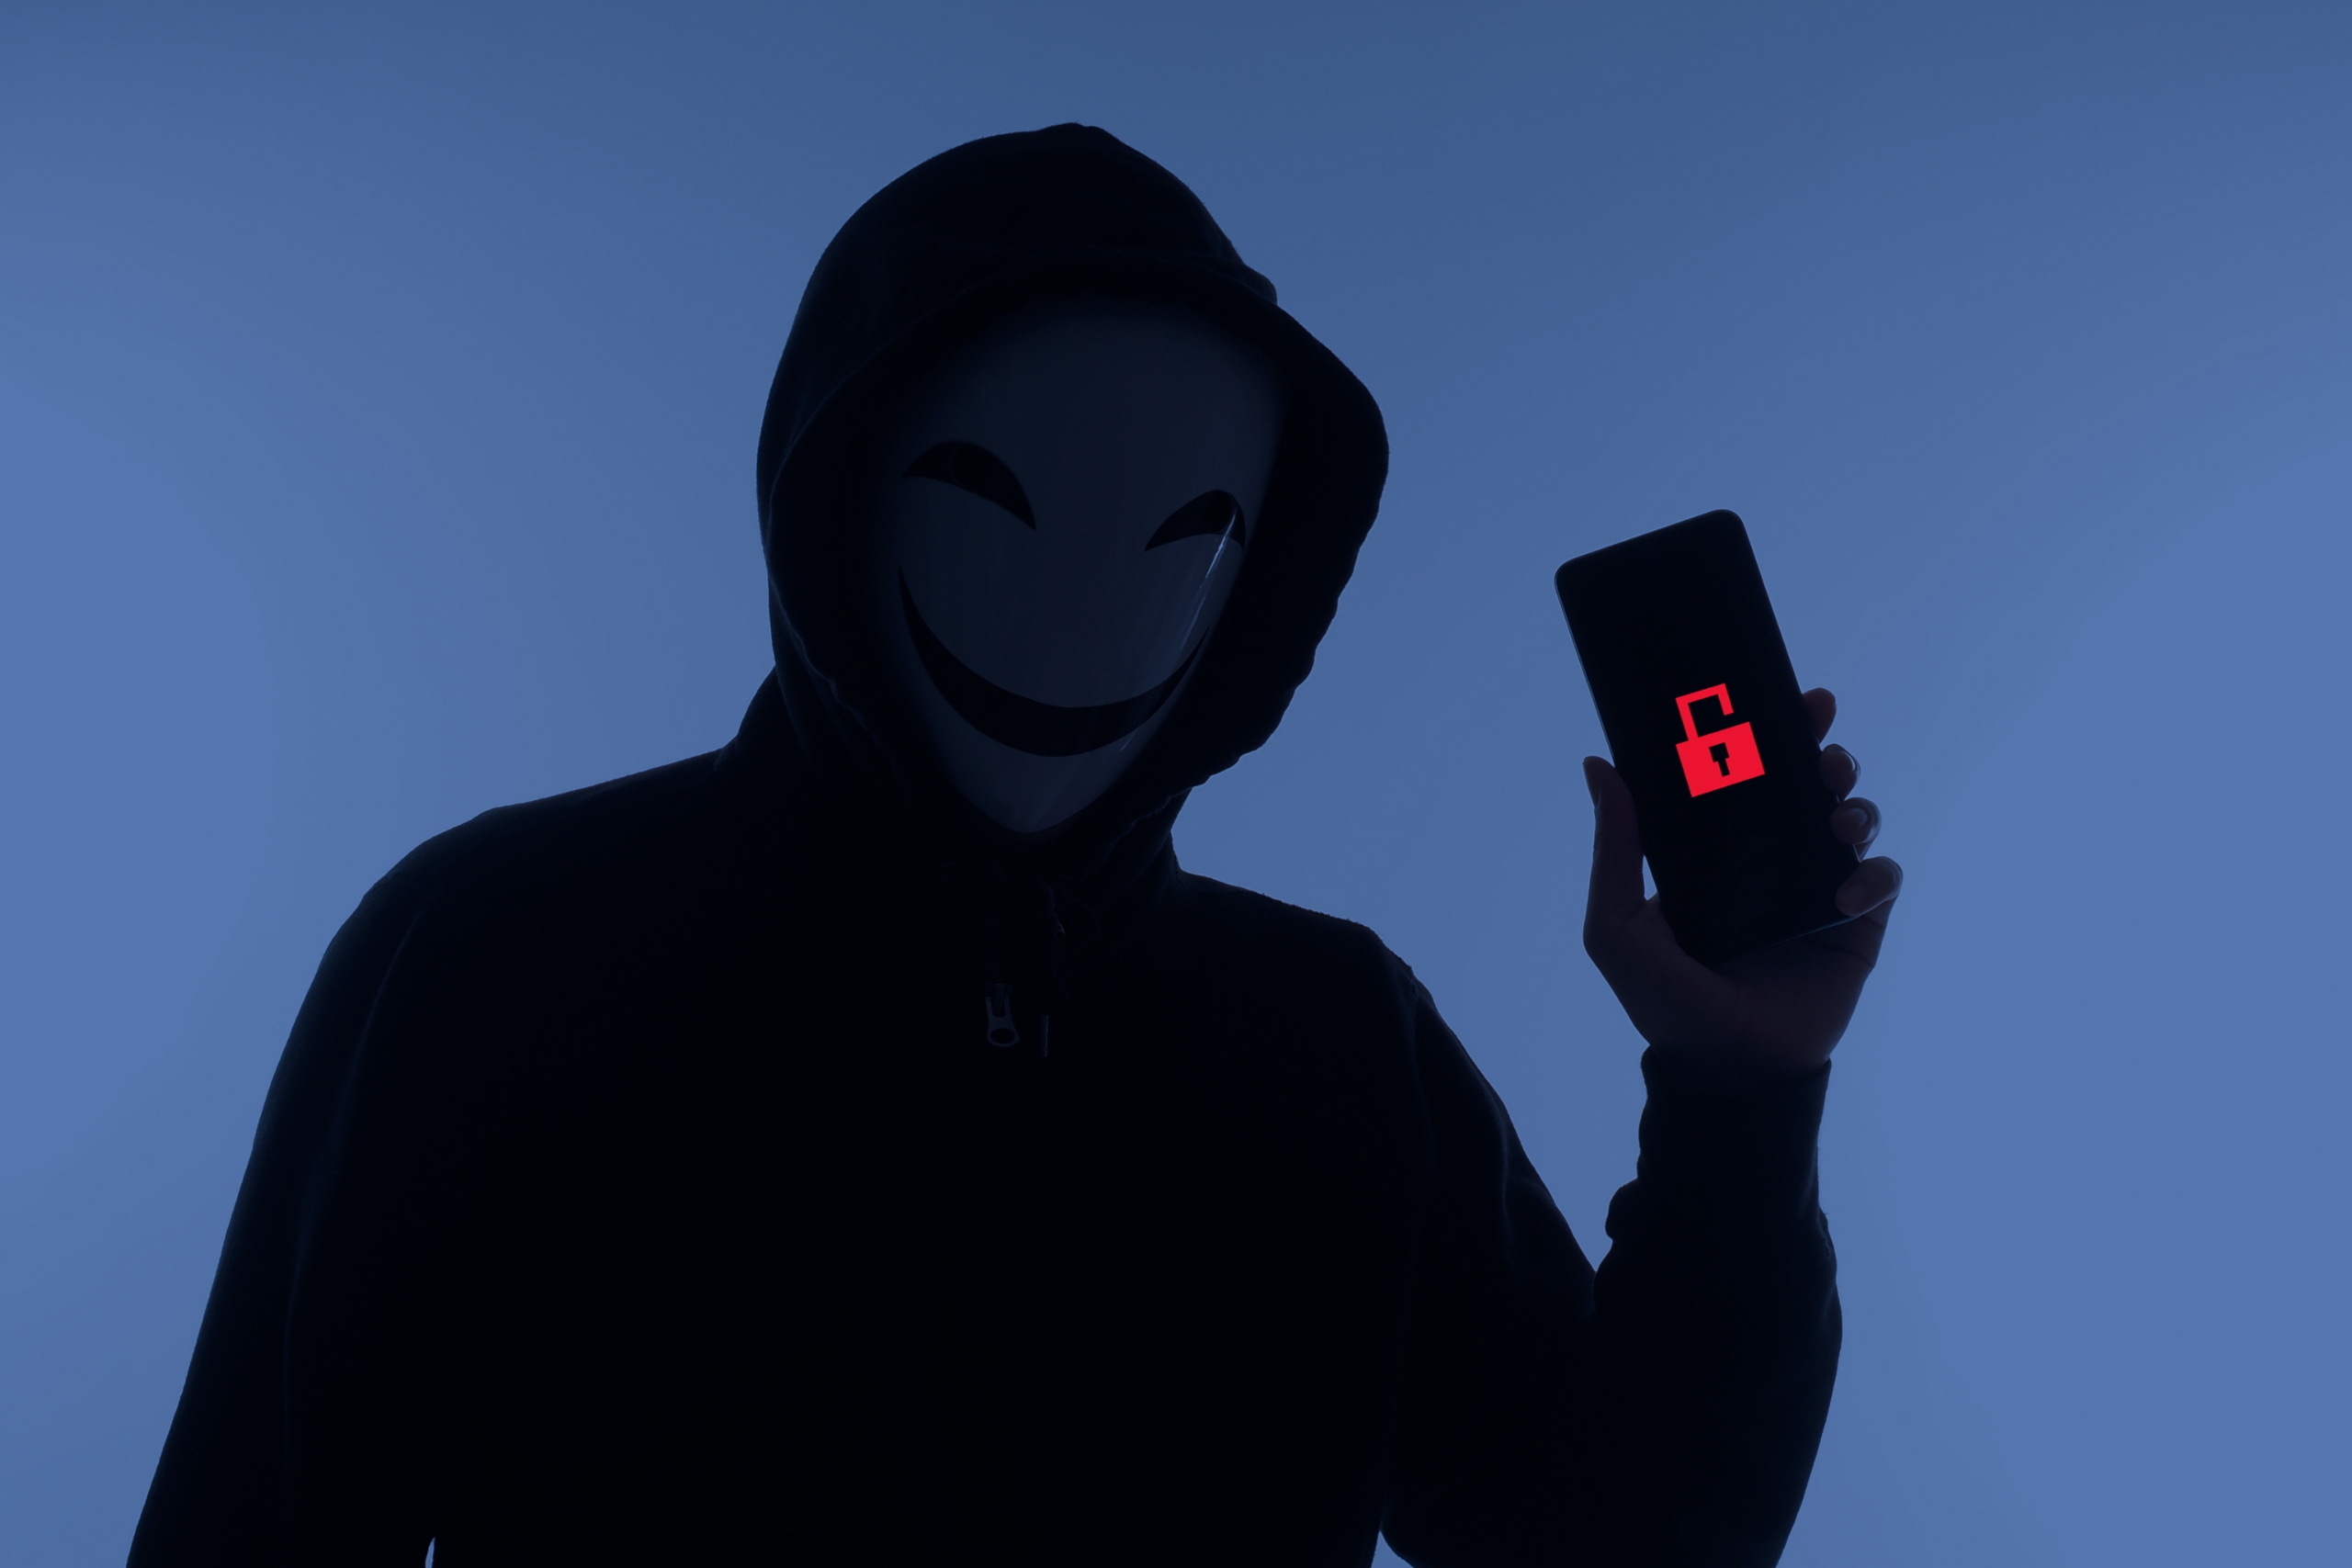 Hacker Anonymous and face mask with smartphone in hand